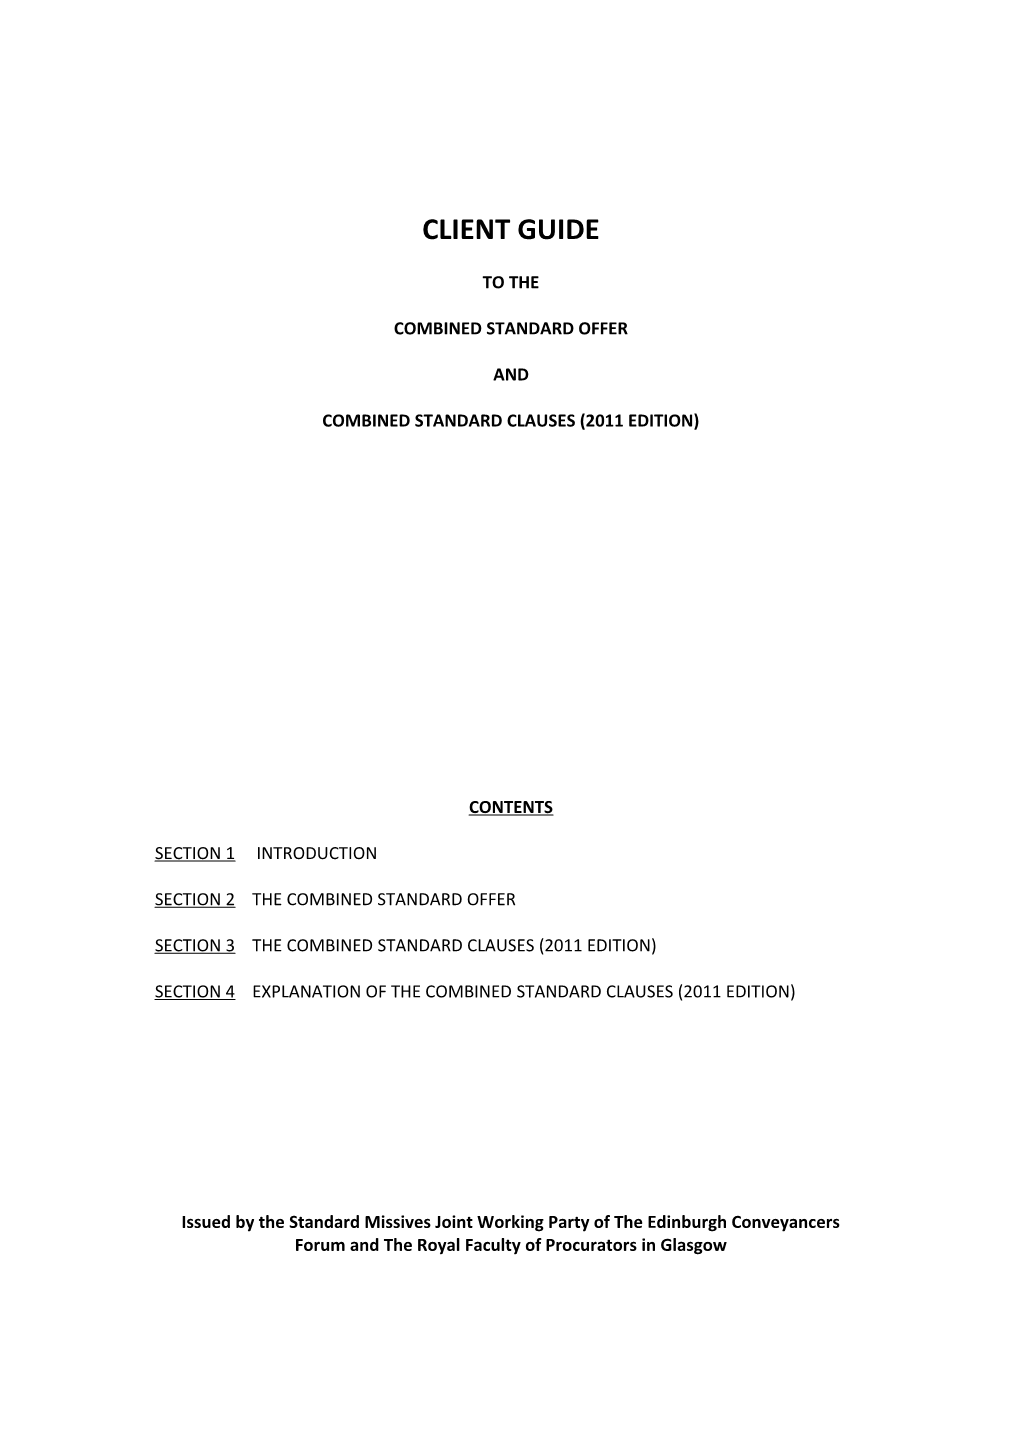 Combined Standard Clauses (2011 Edition)